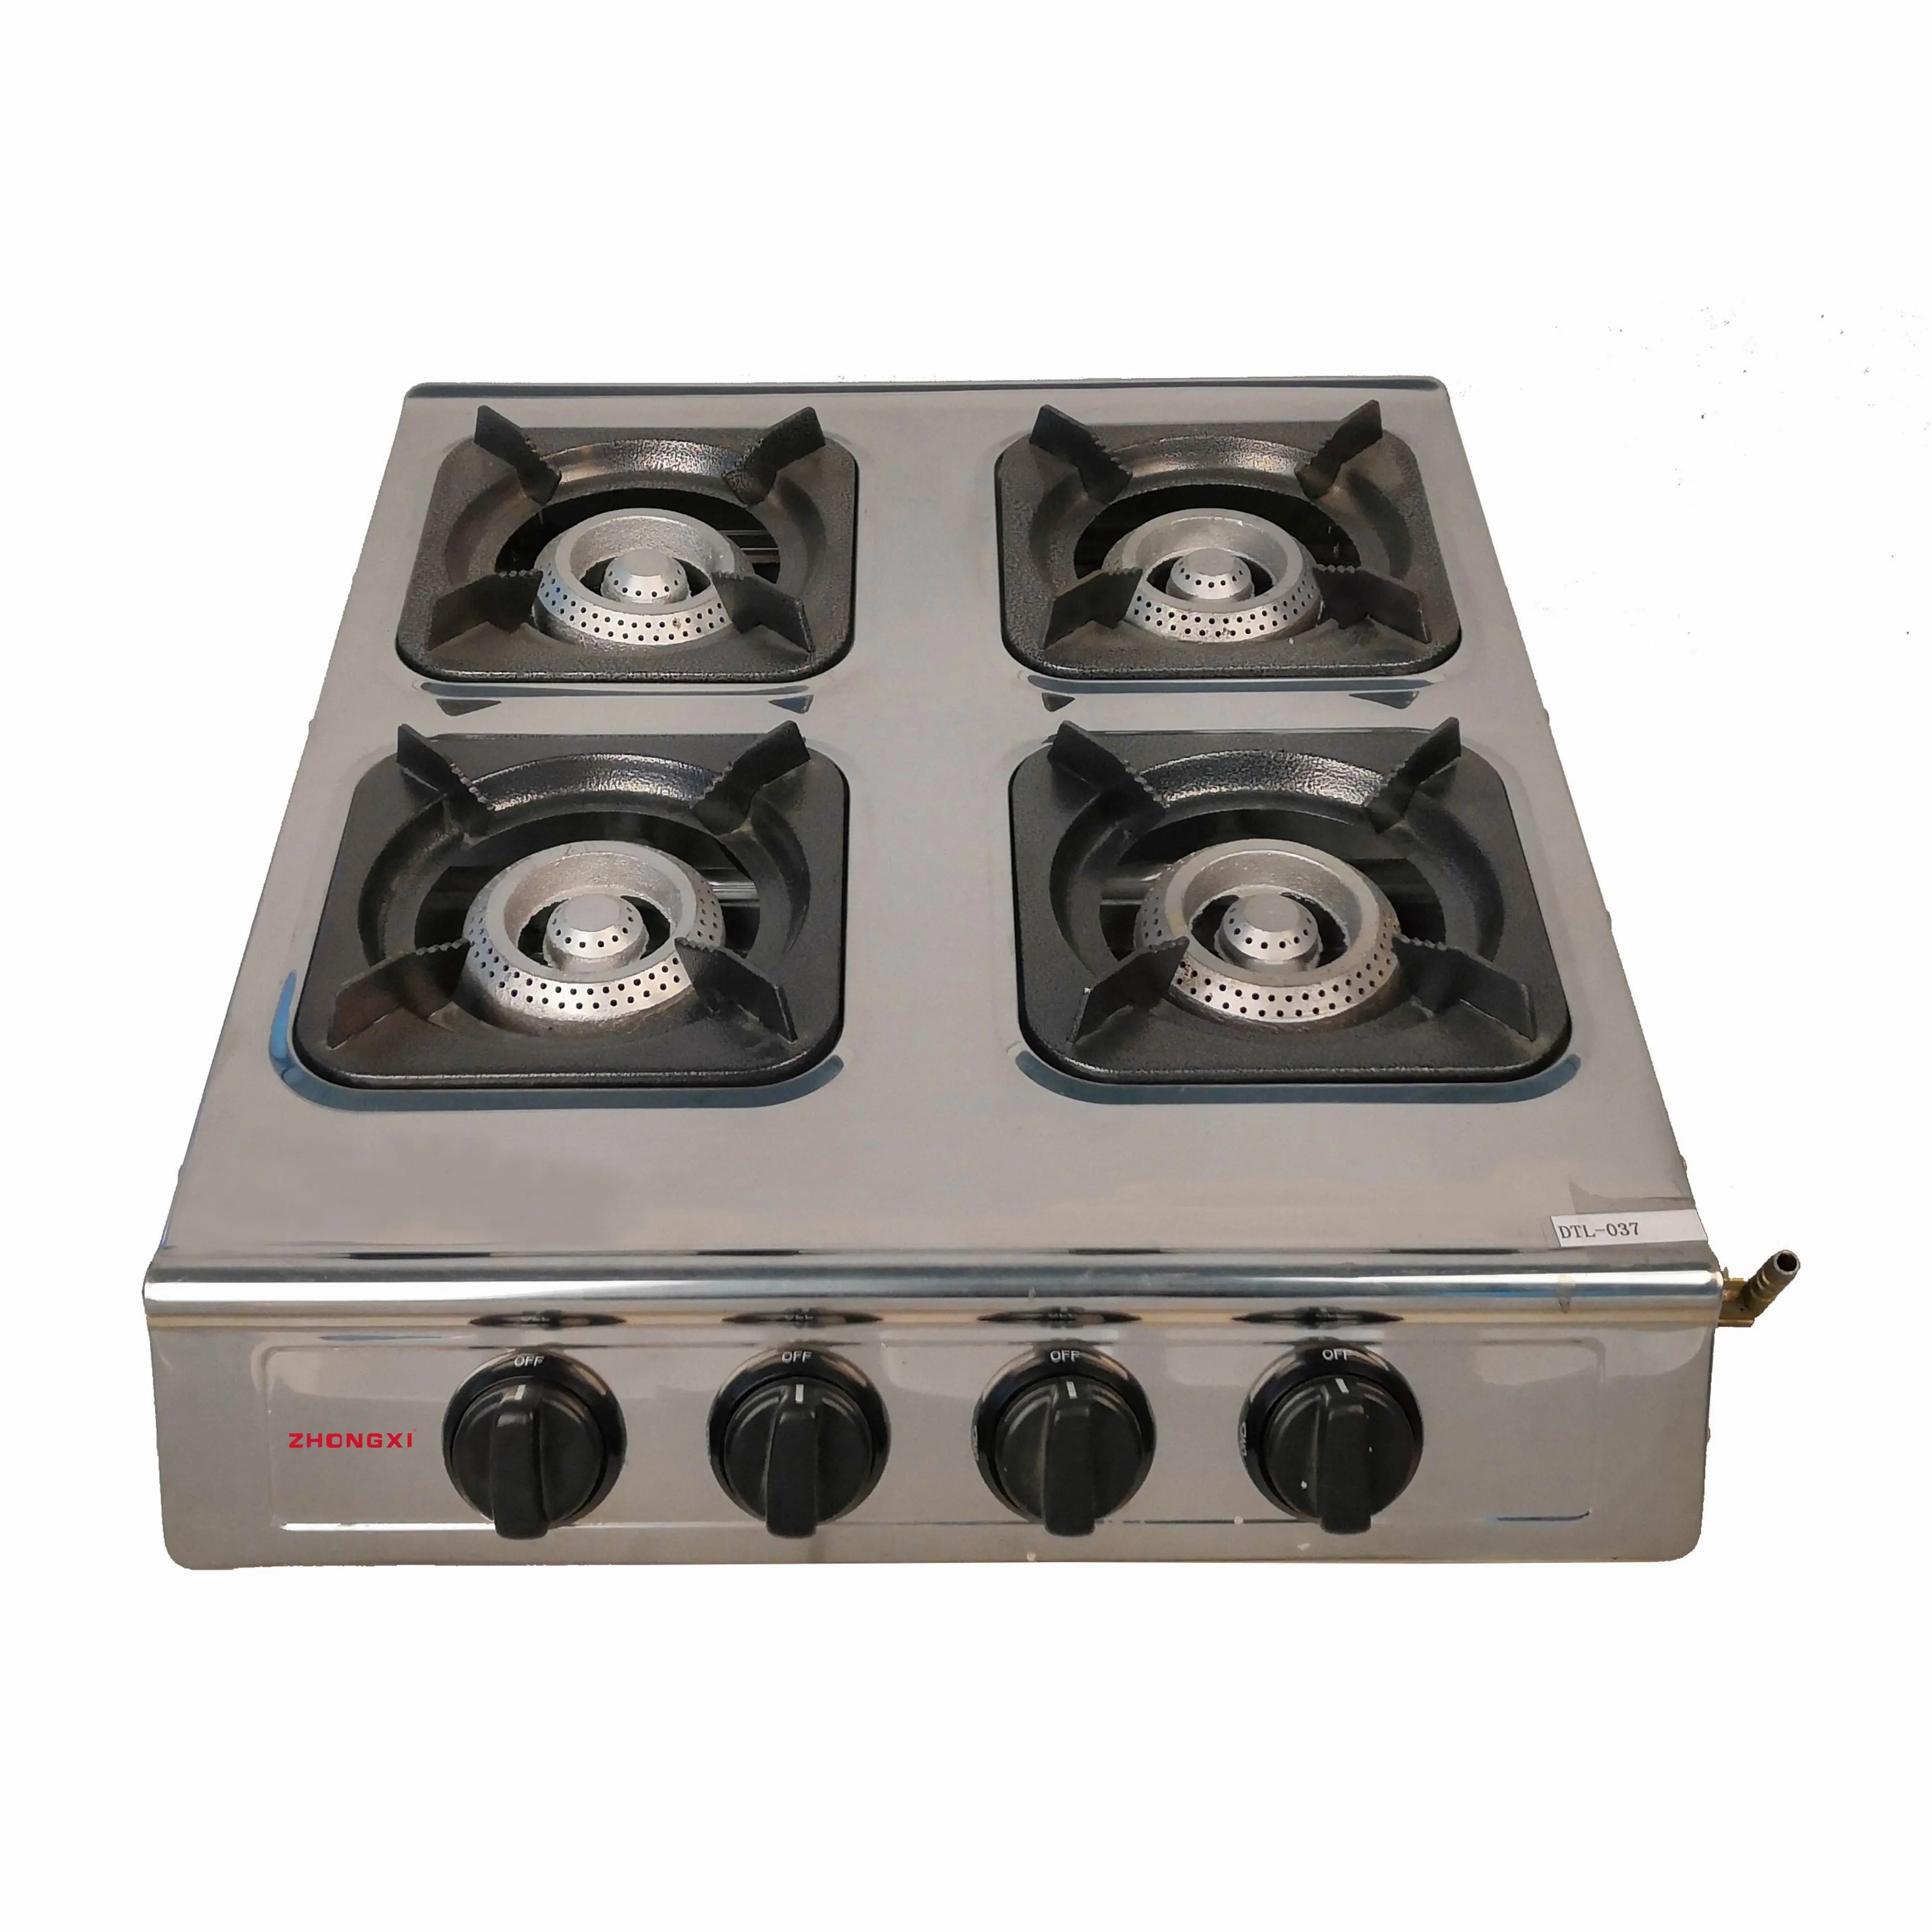 4 Butane for Restaurant Cooker Stainless Steel Table Top honeycomb Gas Stove LPG 4 Burner Gas Stove Home Cooking Appliance